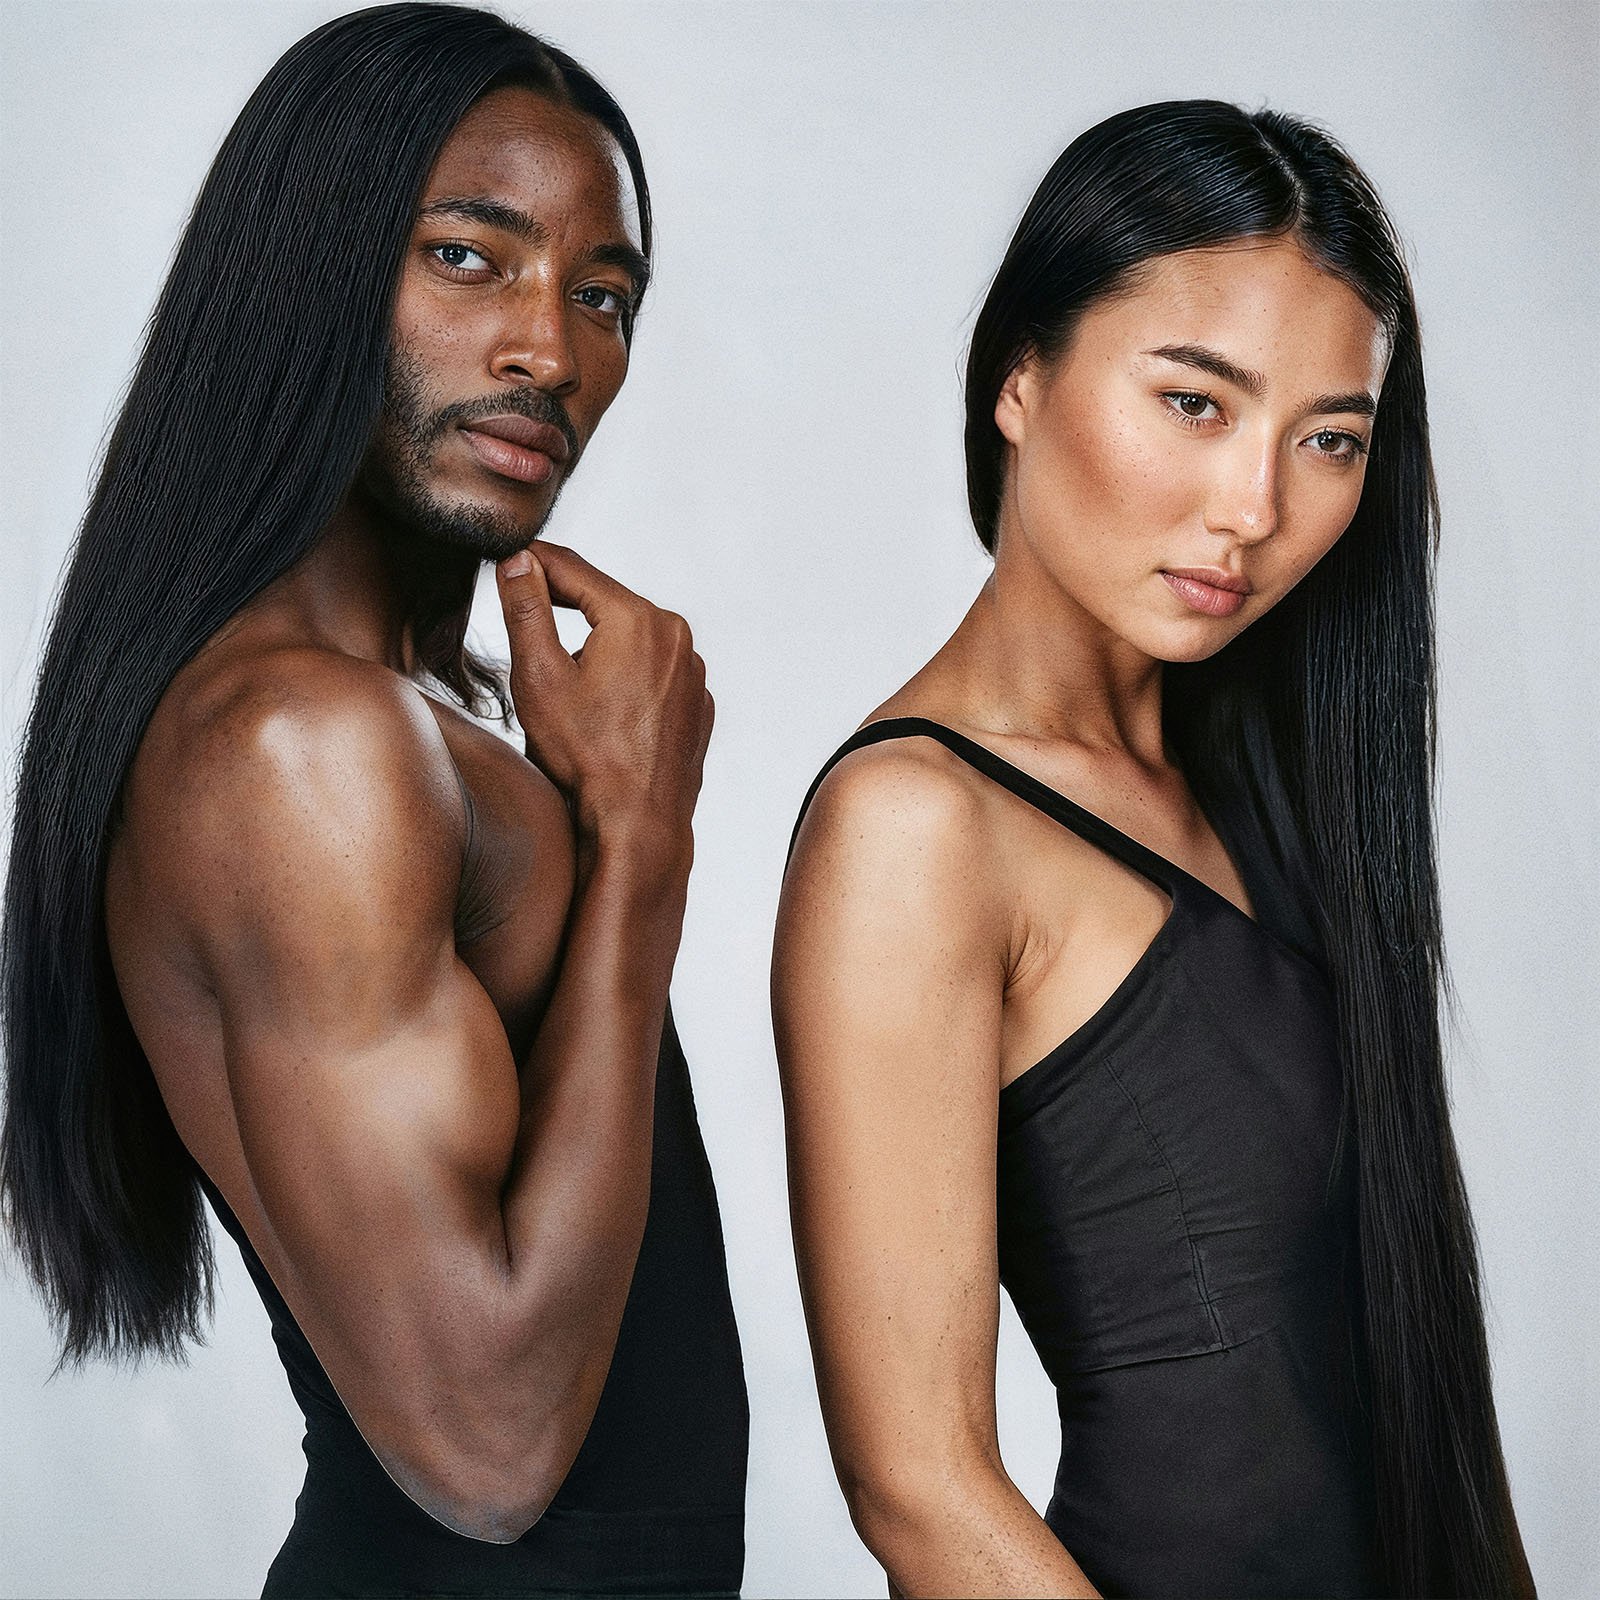 Two models with long straight hair posing back-to-back, one black man shirtless and one asian woman in a black dress, against a grey background.